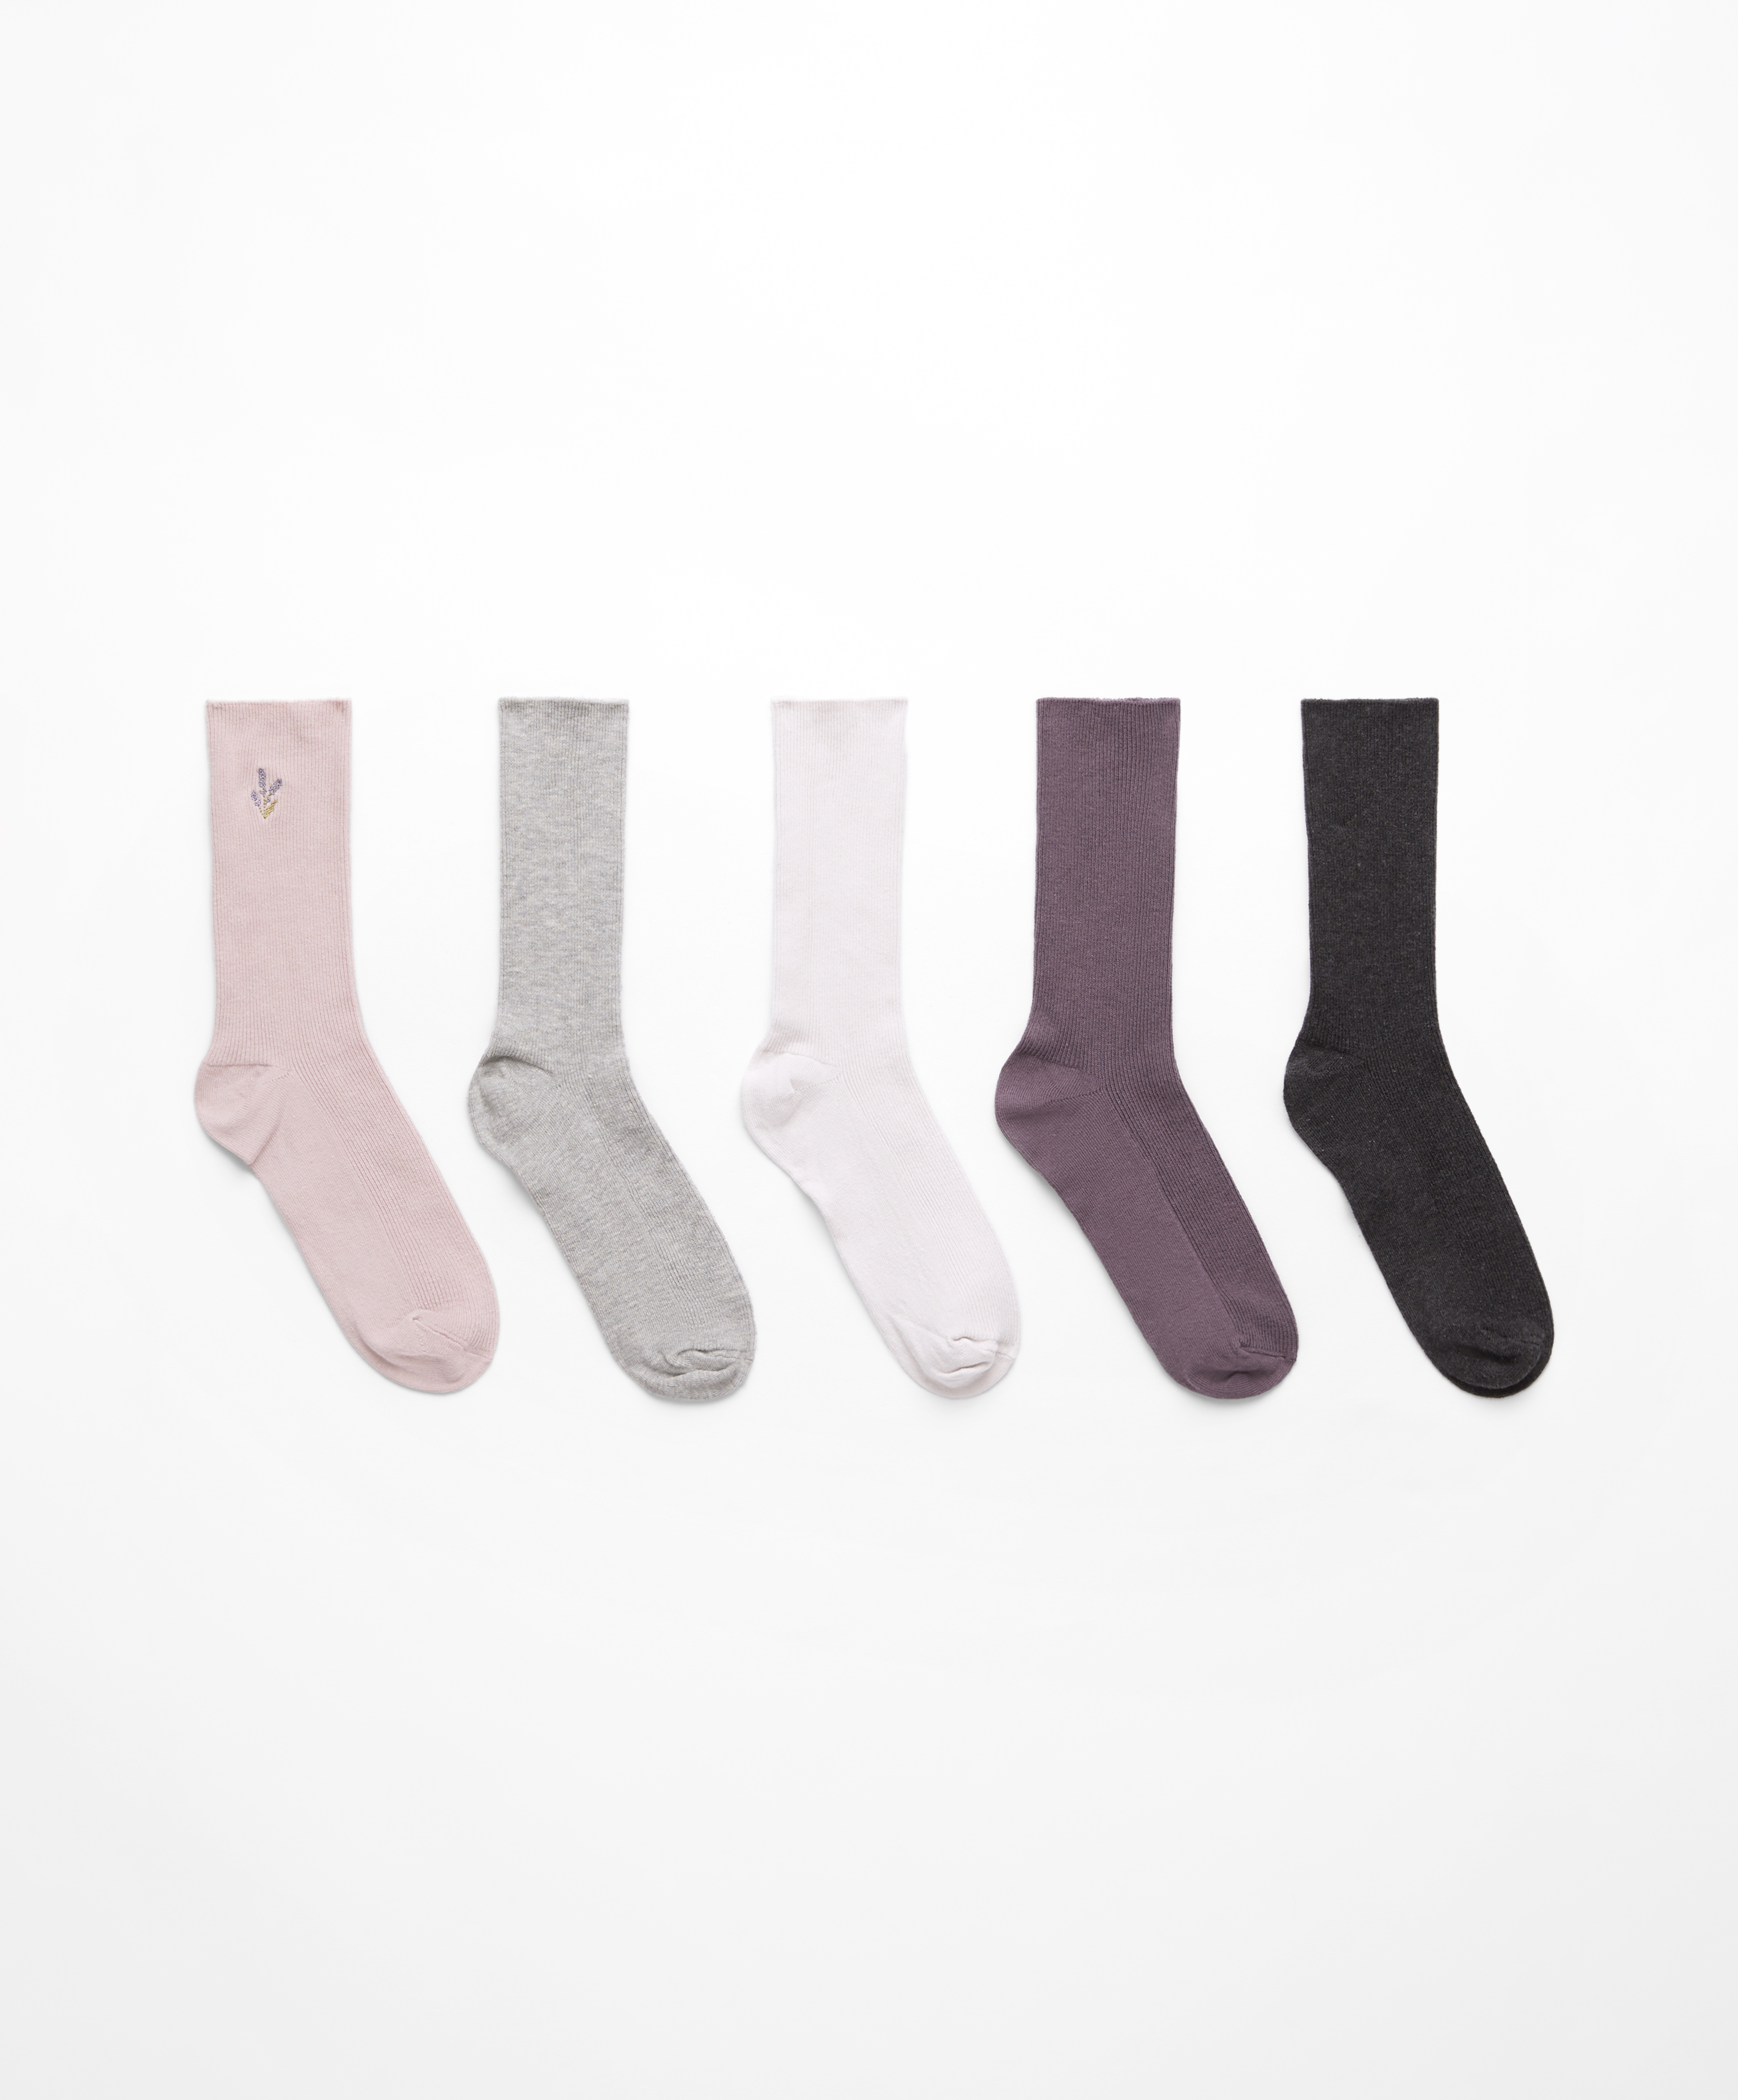 5 pairs of ribbed cotton classic socks